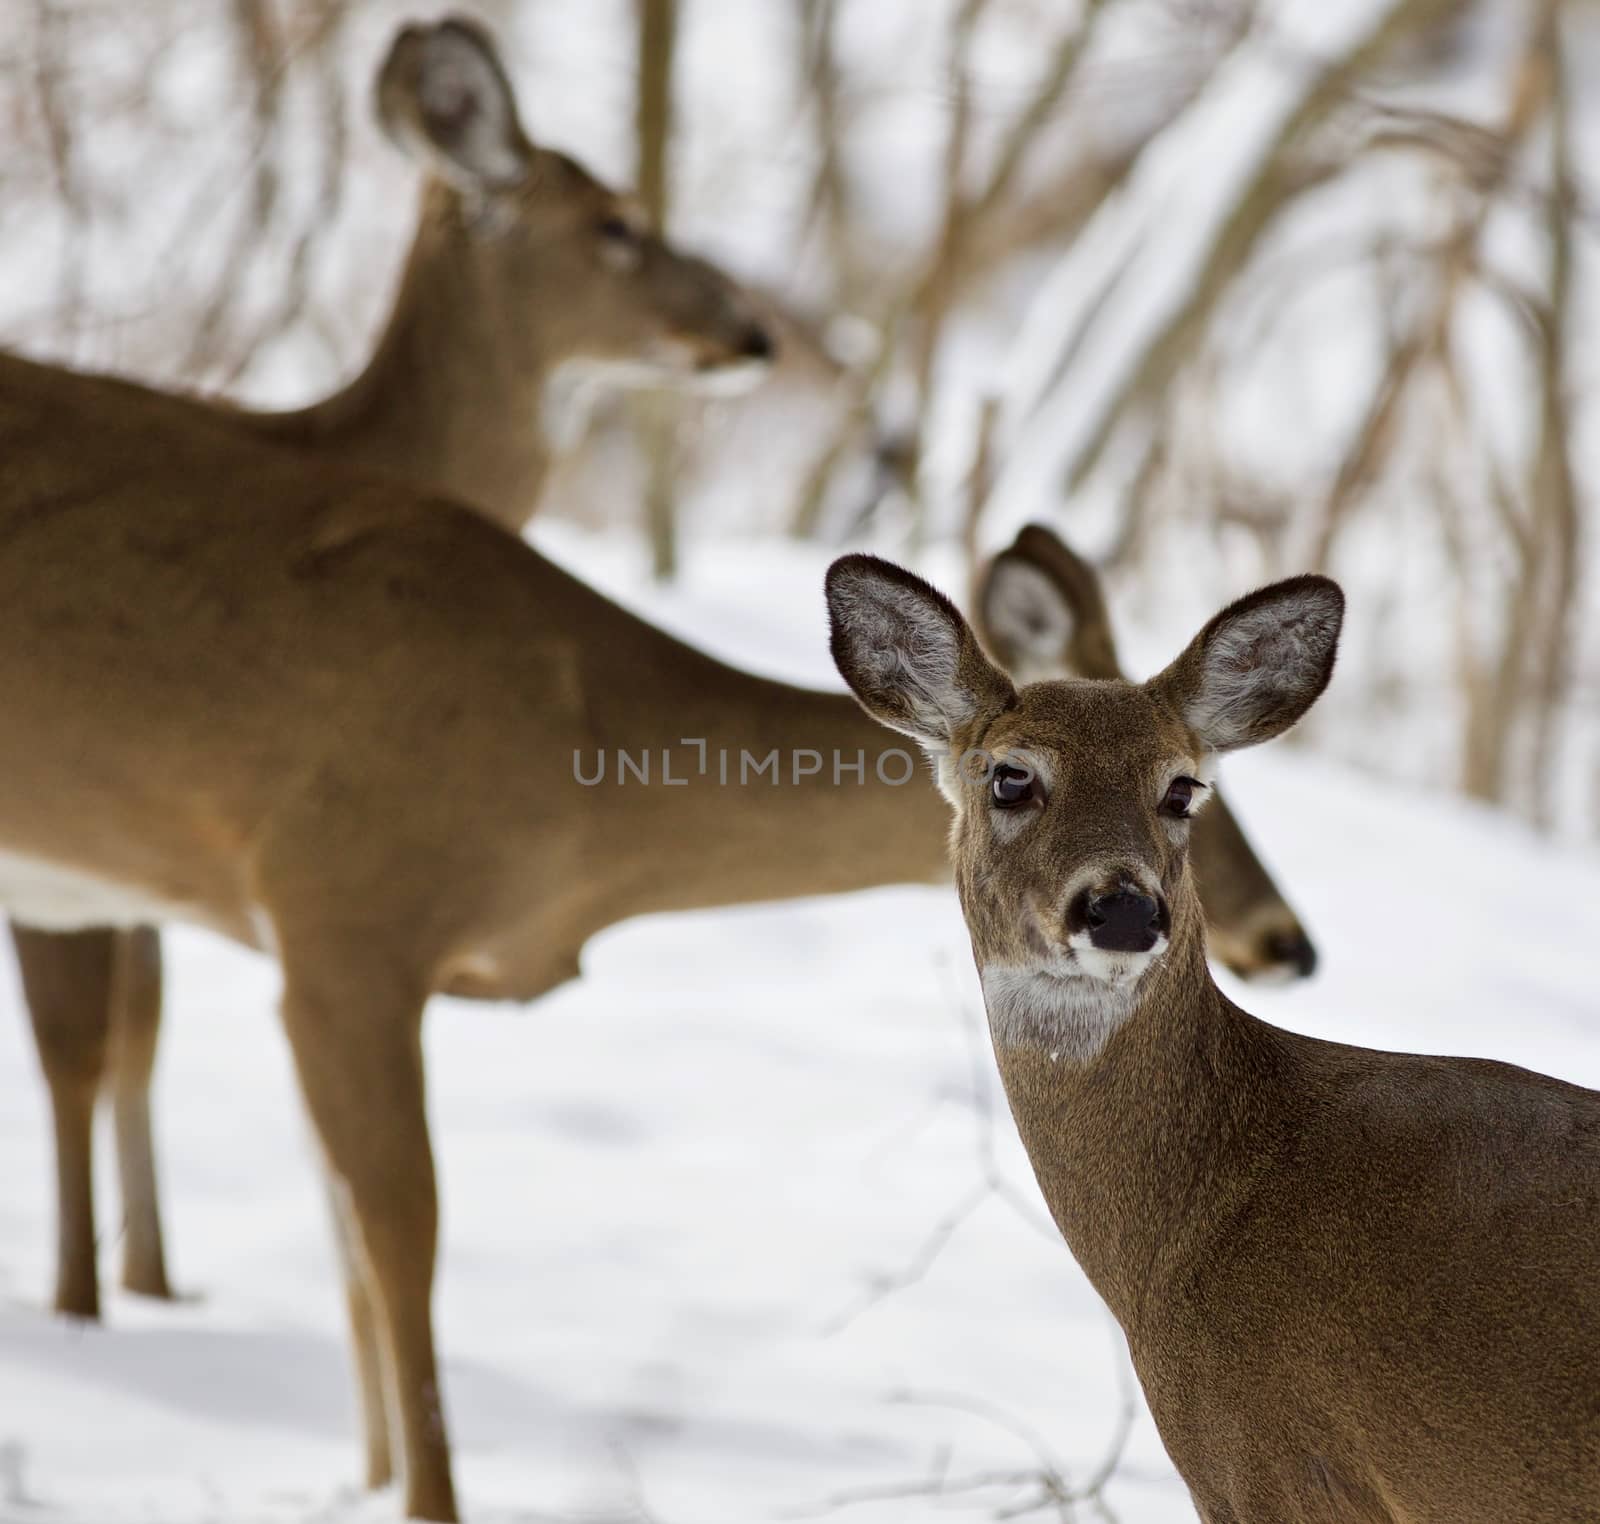 Beautiful image of three wild deer in the snowy forest by teo